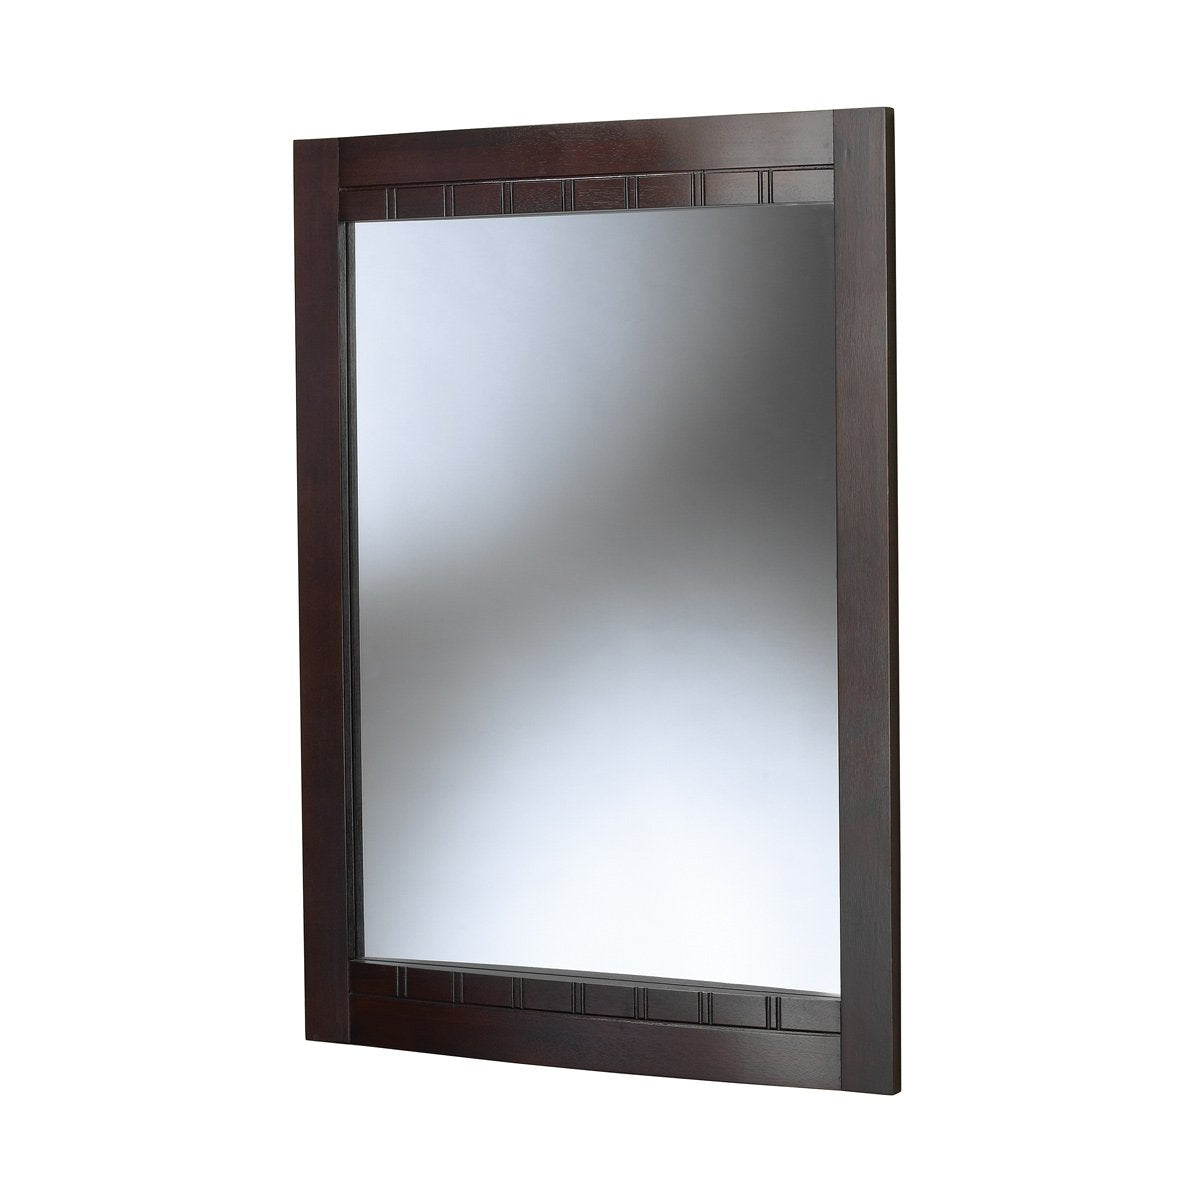 Foremost CHNM2430 Foremost CHNM2430 Cherie Framed Mirror Burnished Walnut